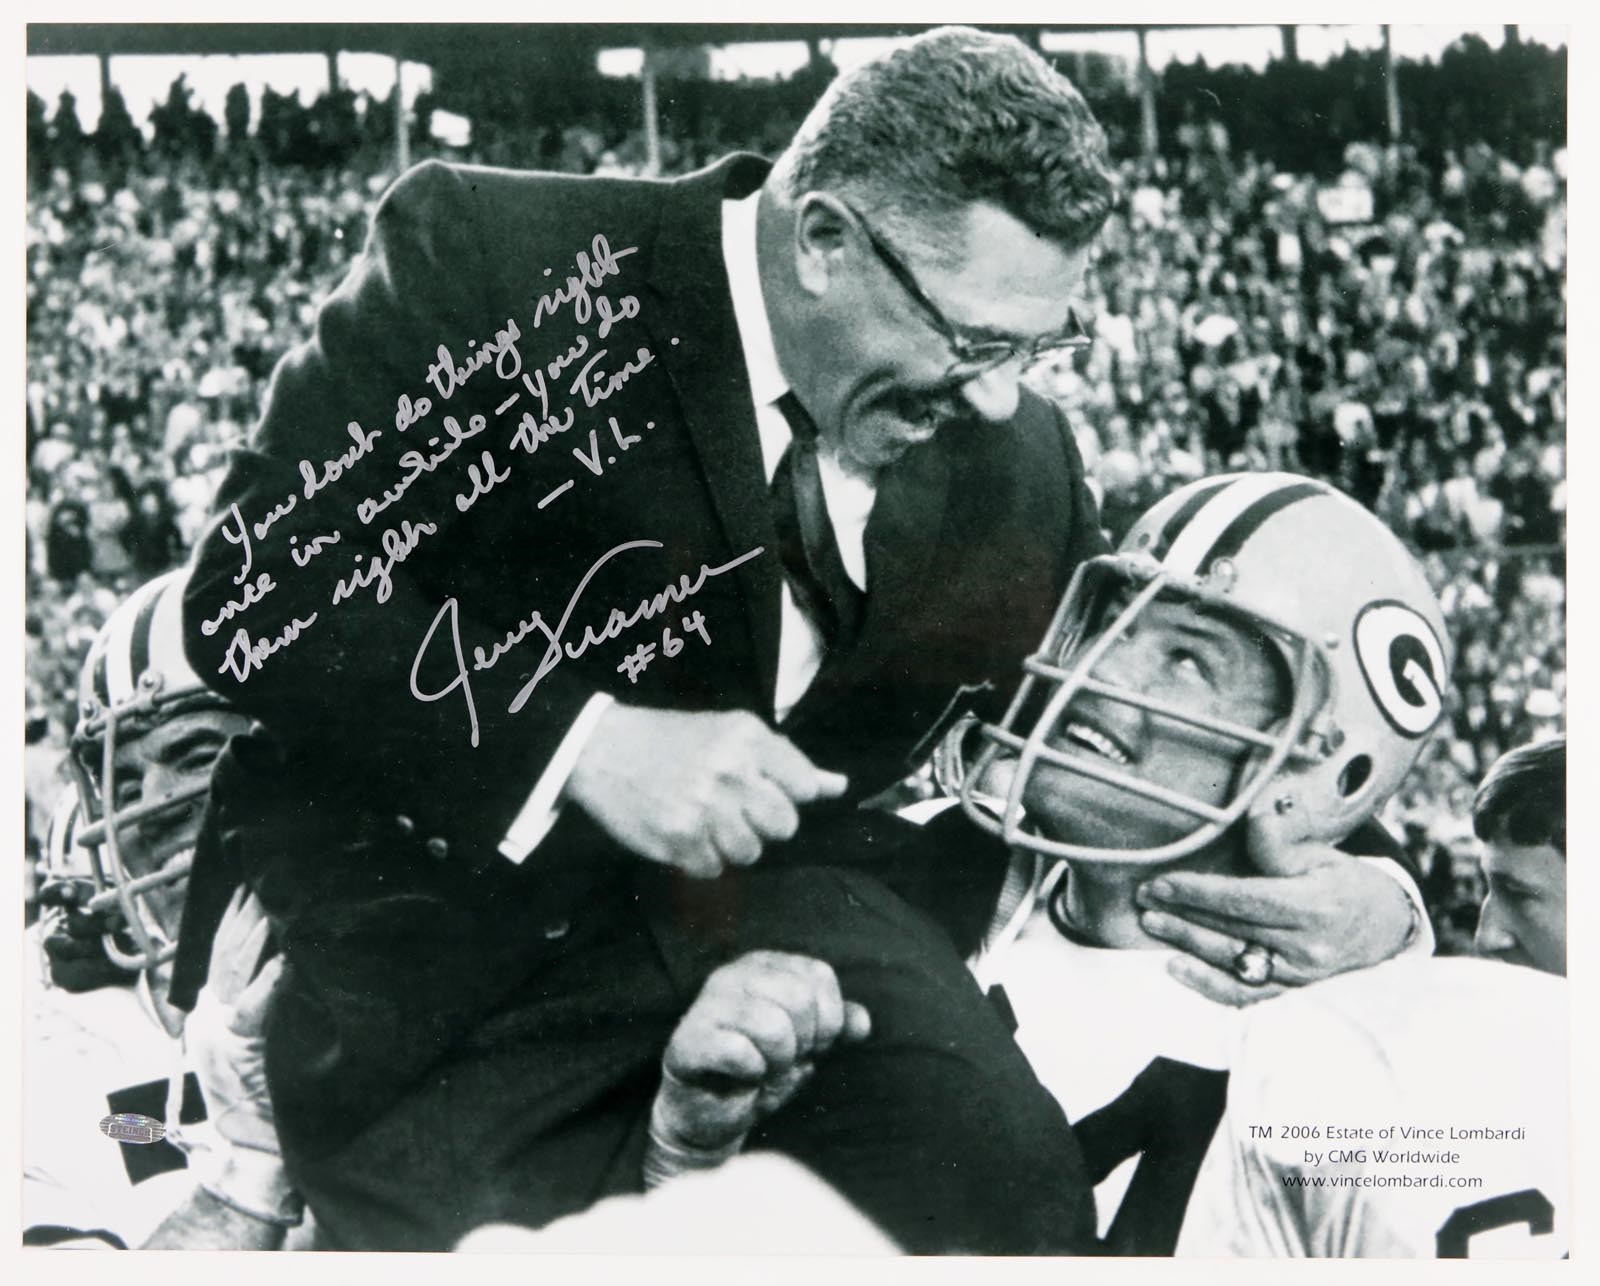 - Jerry Kramer with Vince Lombardi Signed Inscribed Quote Photograph (Steiner COA)